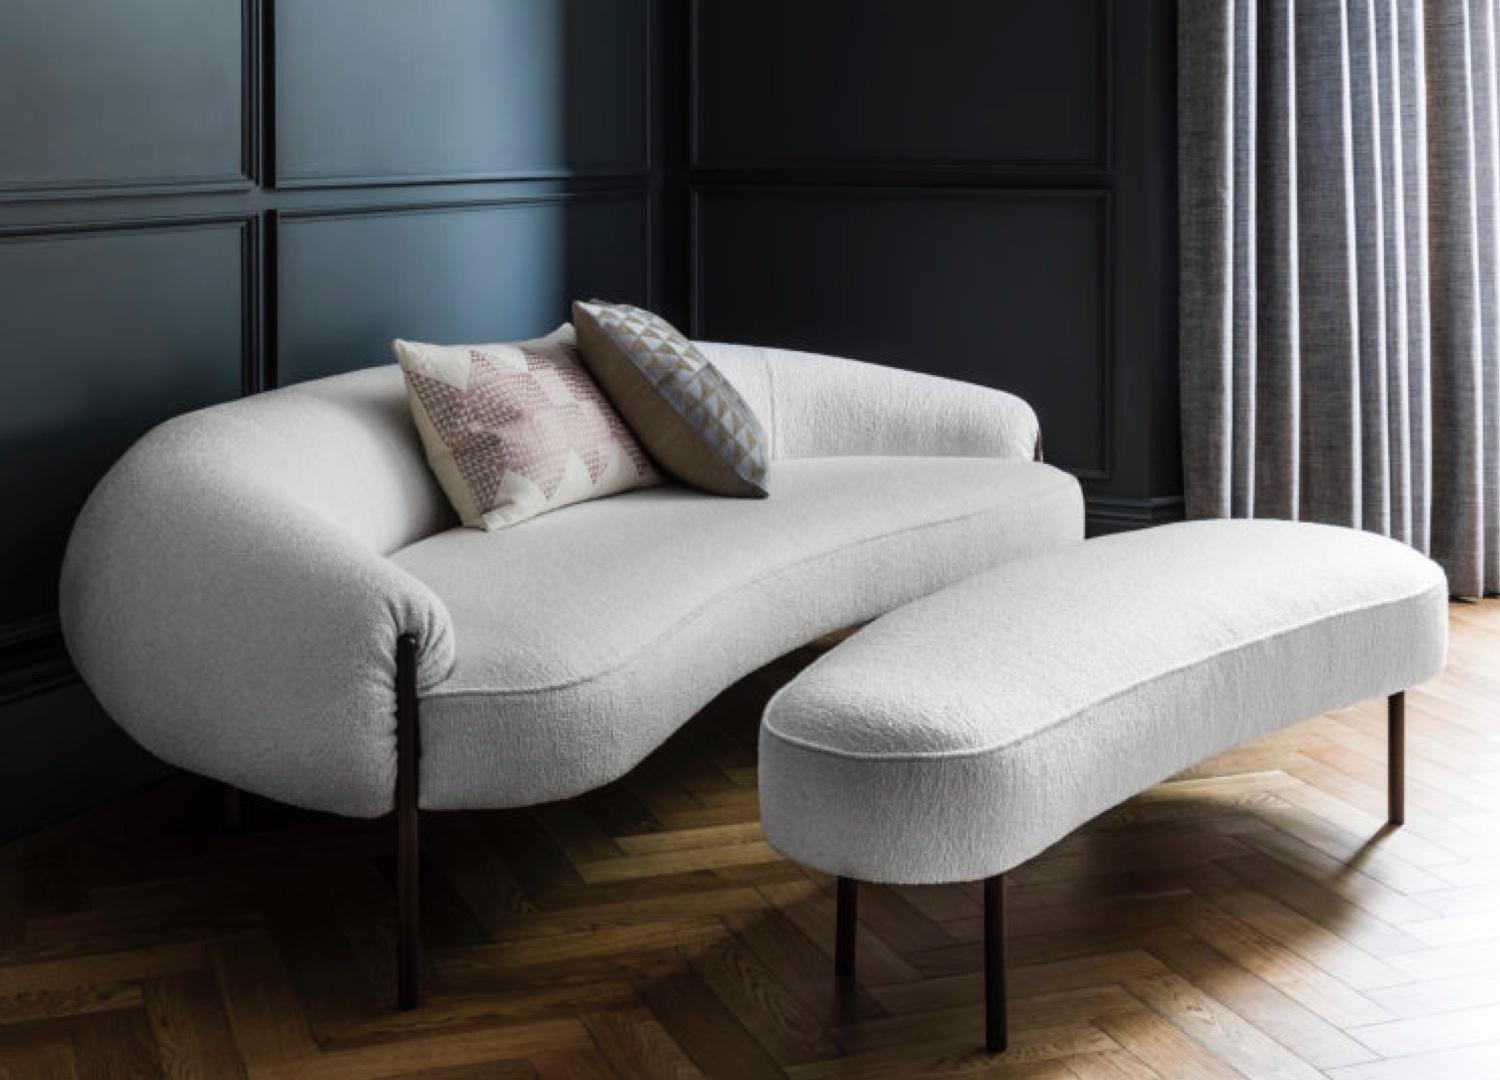 Contemporary Sofa 'Isola' by Amura Lab 
Designer: Lucy Kurrein

Model shown: Textile - Galba 110

Dimensions : 
- Sofa : H. 67 x W. 220 x D. 99 cm 

“Isola: icon of the future” Isola is a statement of intent, a design collection comprising sofas,